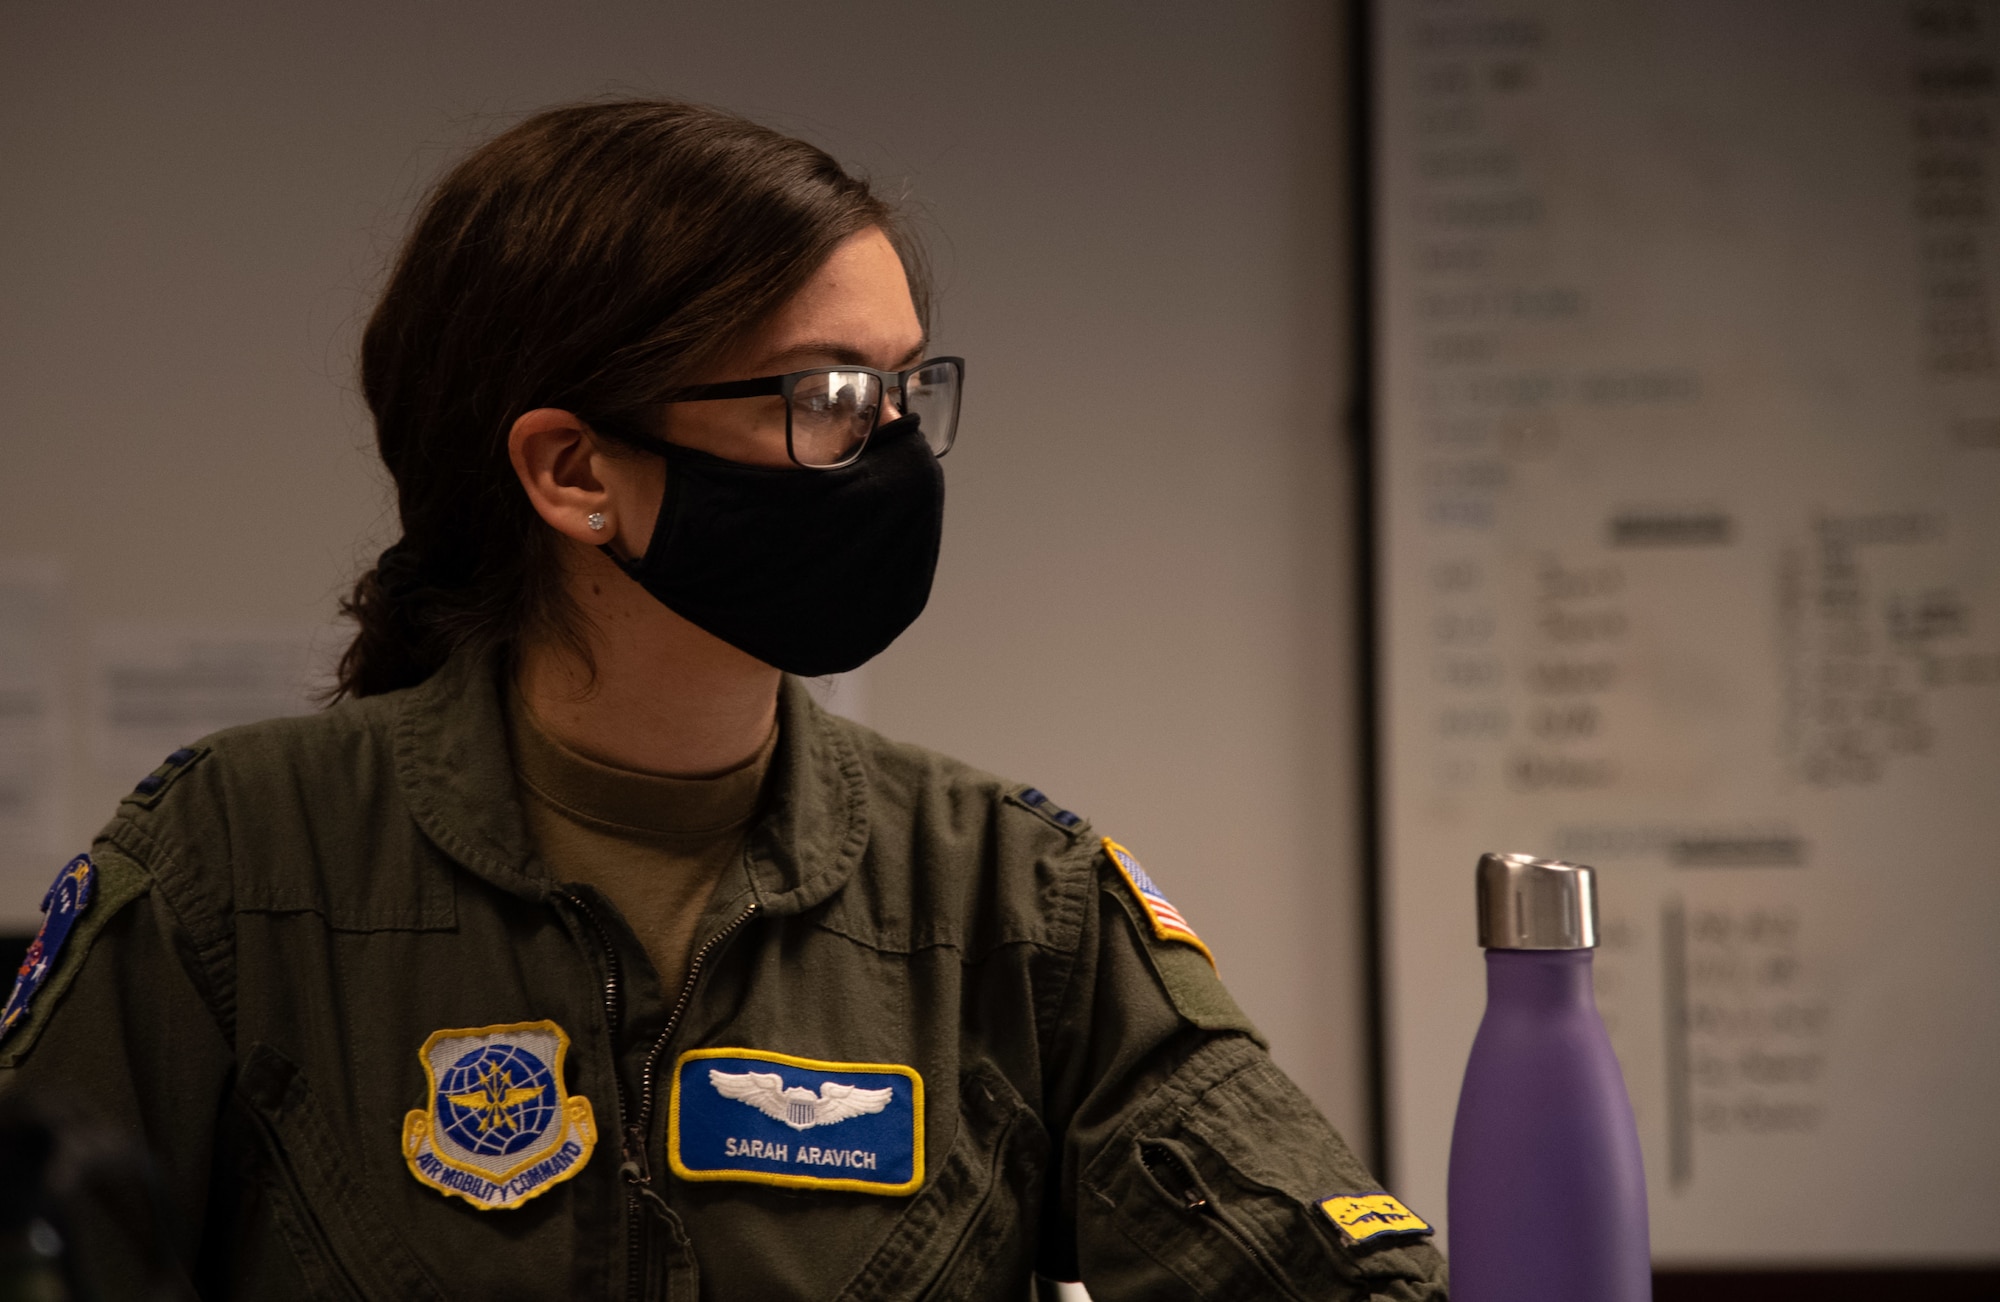 Capt. Sarah Aravich, 3rd Airlift Squadron pilot, attends a mission briefing at Dover Air Force Base, Delaware, Jan. 28, 2021. Night missions serve to ensure aircrew effectiveness and readiness in contested and challenging environments. The 3rd AS routinely trains to support global engagement through direct delivery of time-critical theater deployment assets and ensure aircrew operational readiness. (U.S. Air Force photo by Airman 1st Class Faith Schaefer)